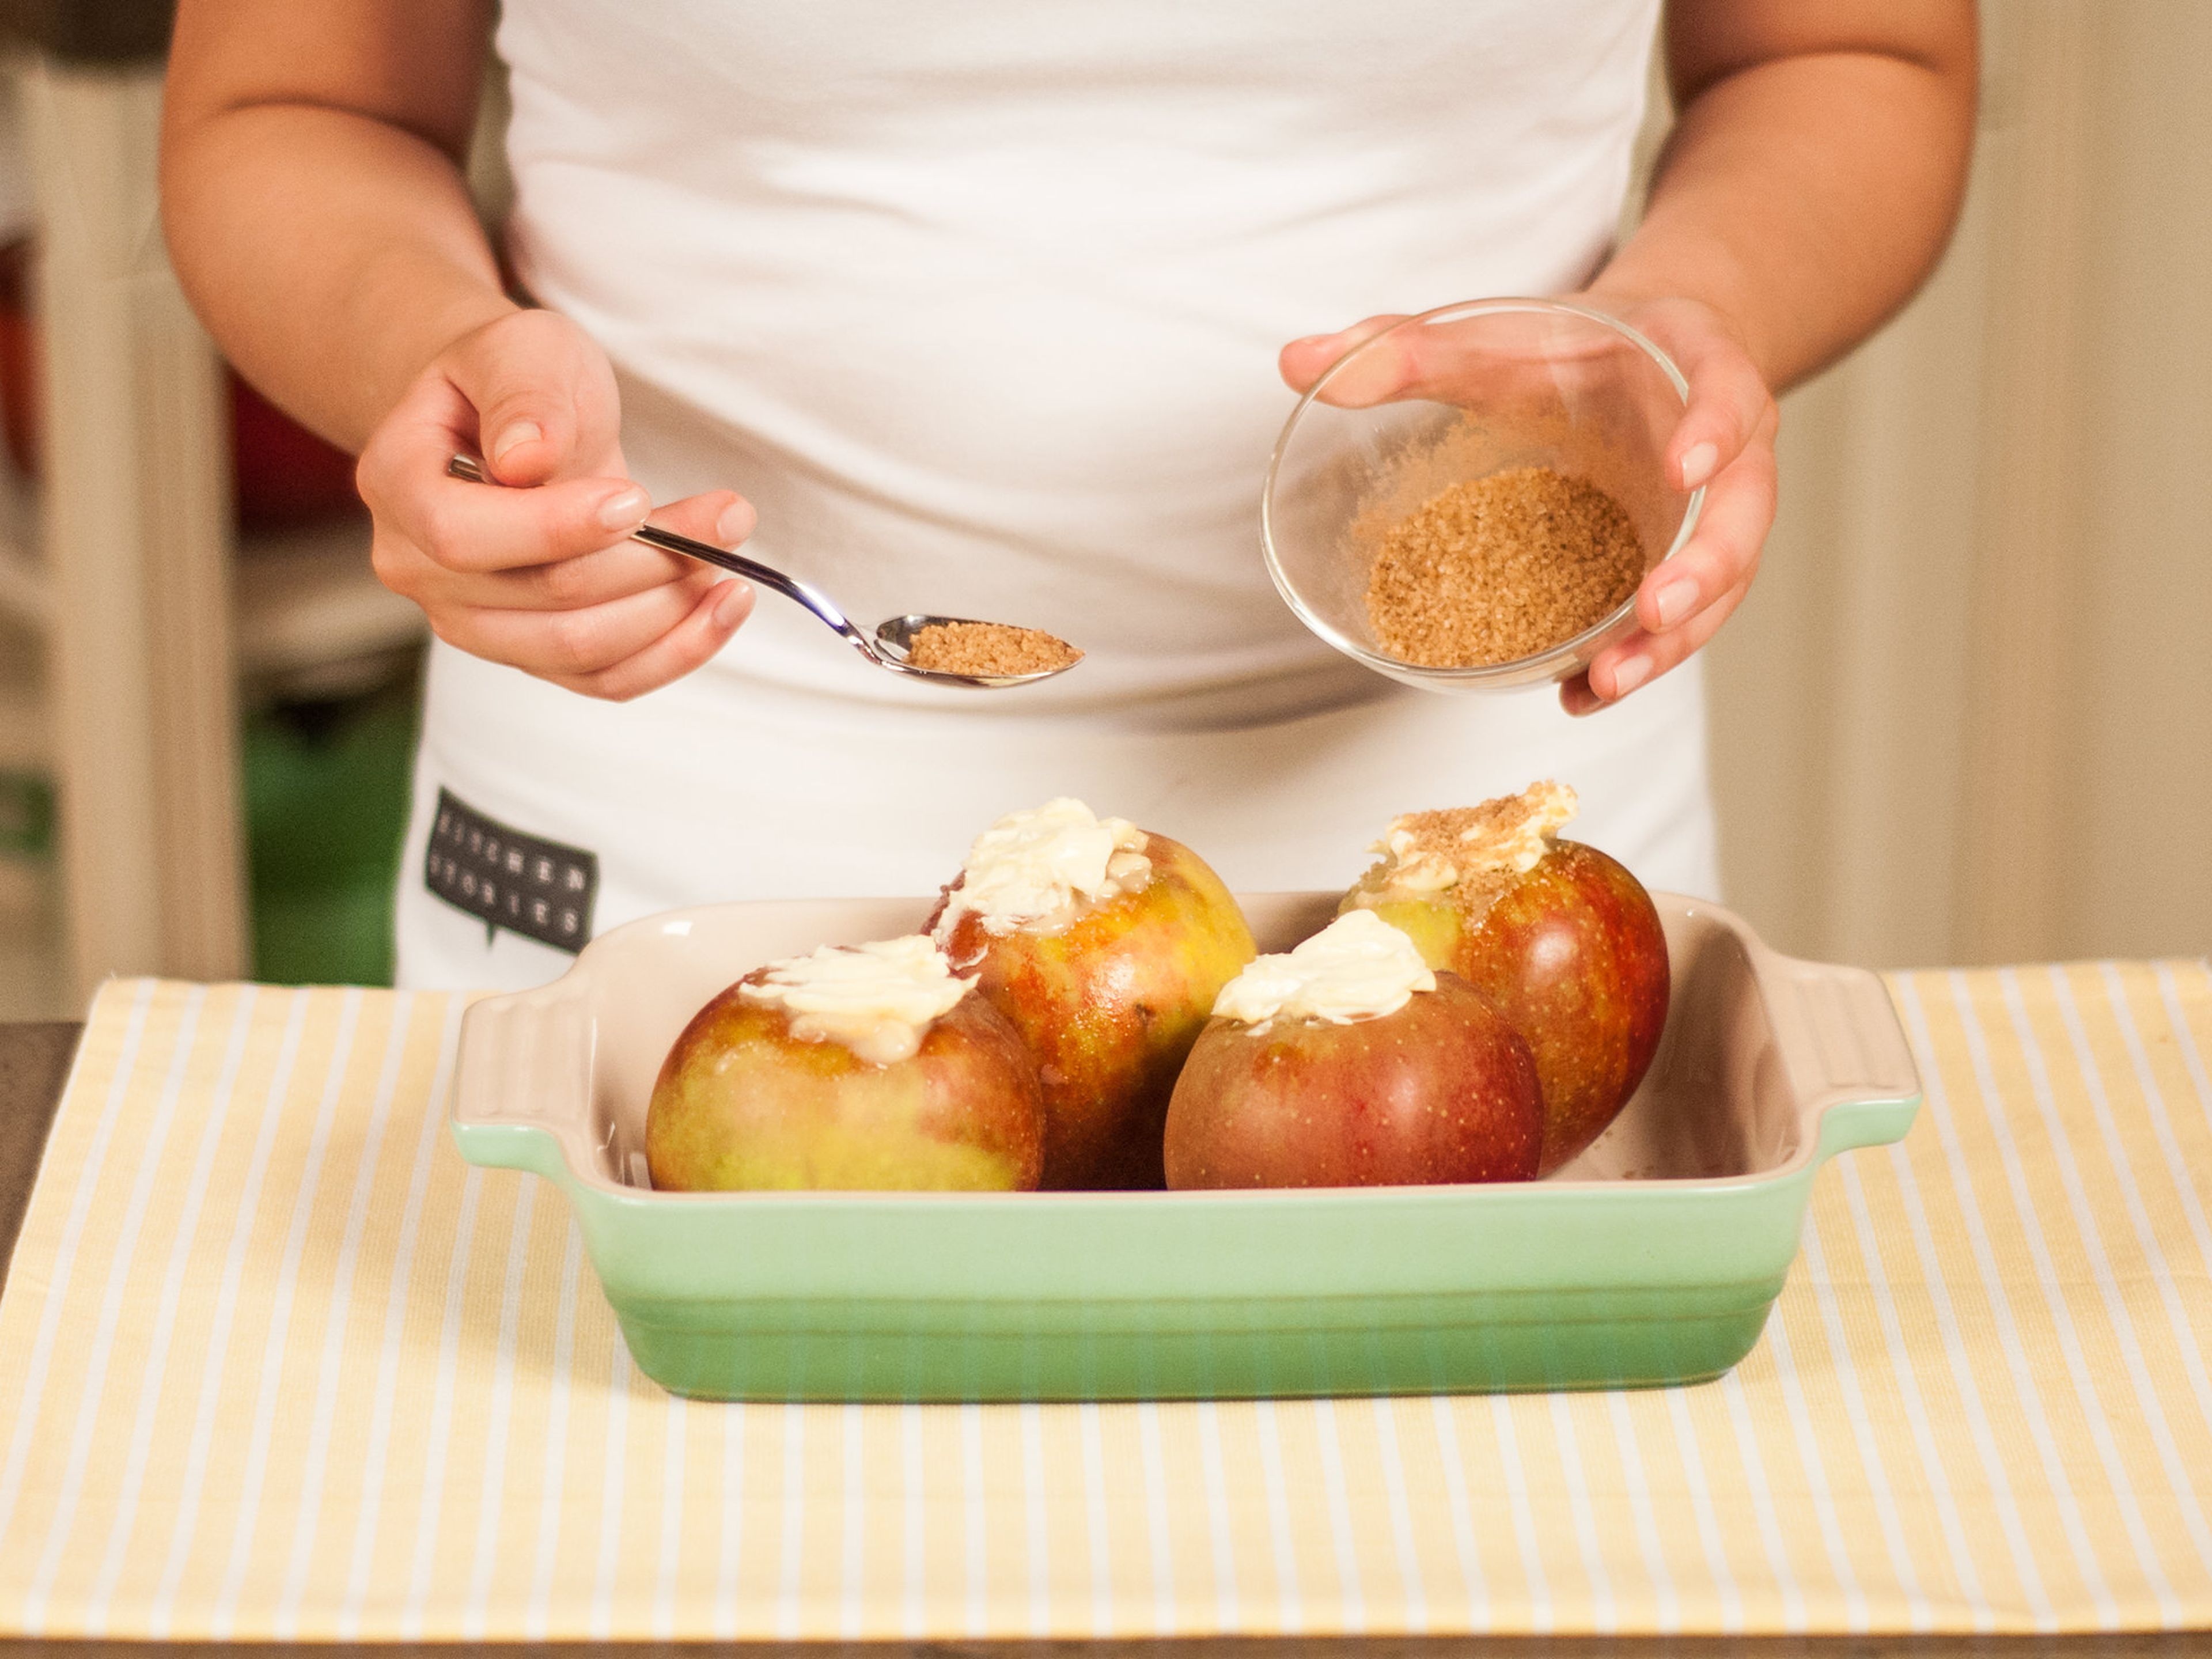 In a small bowl, mix brown sugar and cinnamon and generously sprinkle the apples with the sugar mixture. In a preheated oven, bake apples 180°C/355° for approx. 20 – 30 min. Serve with warm vanilla sauce.